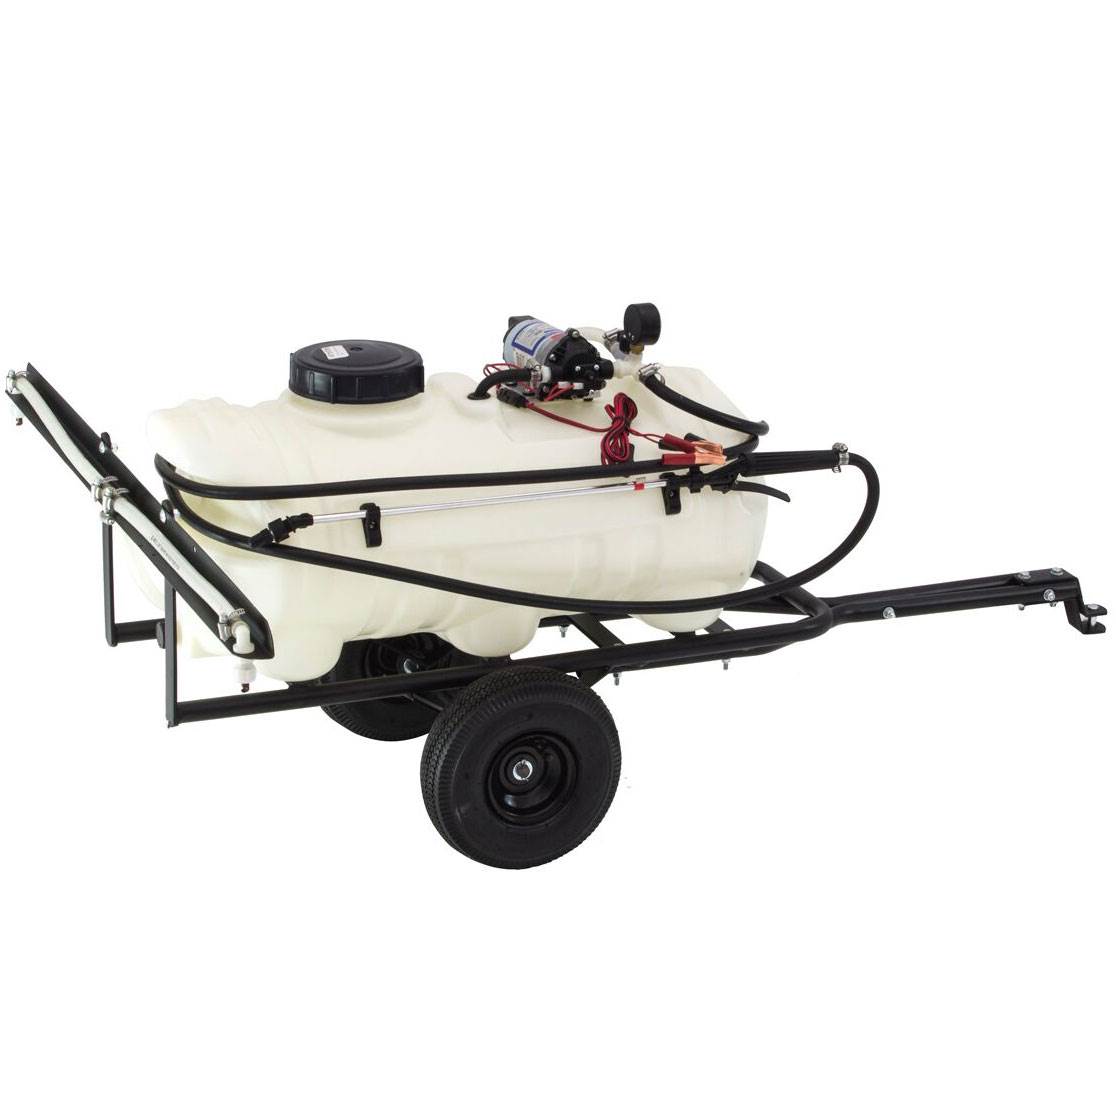 Precision Products 15 Gallon 12 Volt ATV Tractor Mount Trailing Sprayer Tank - image 5 of 6